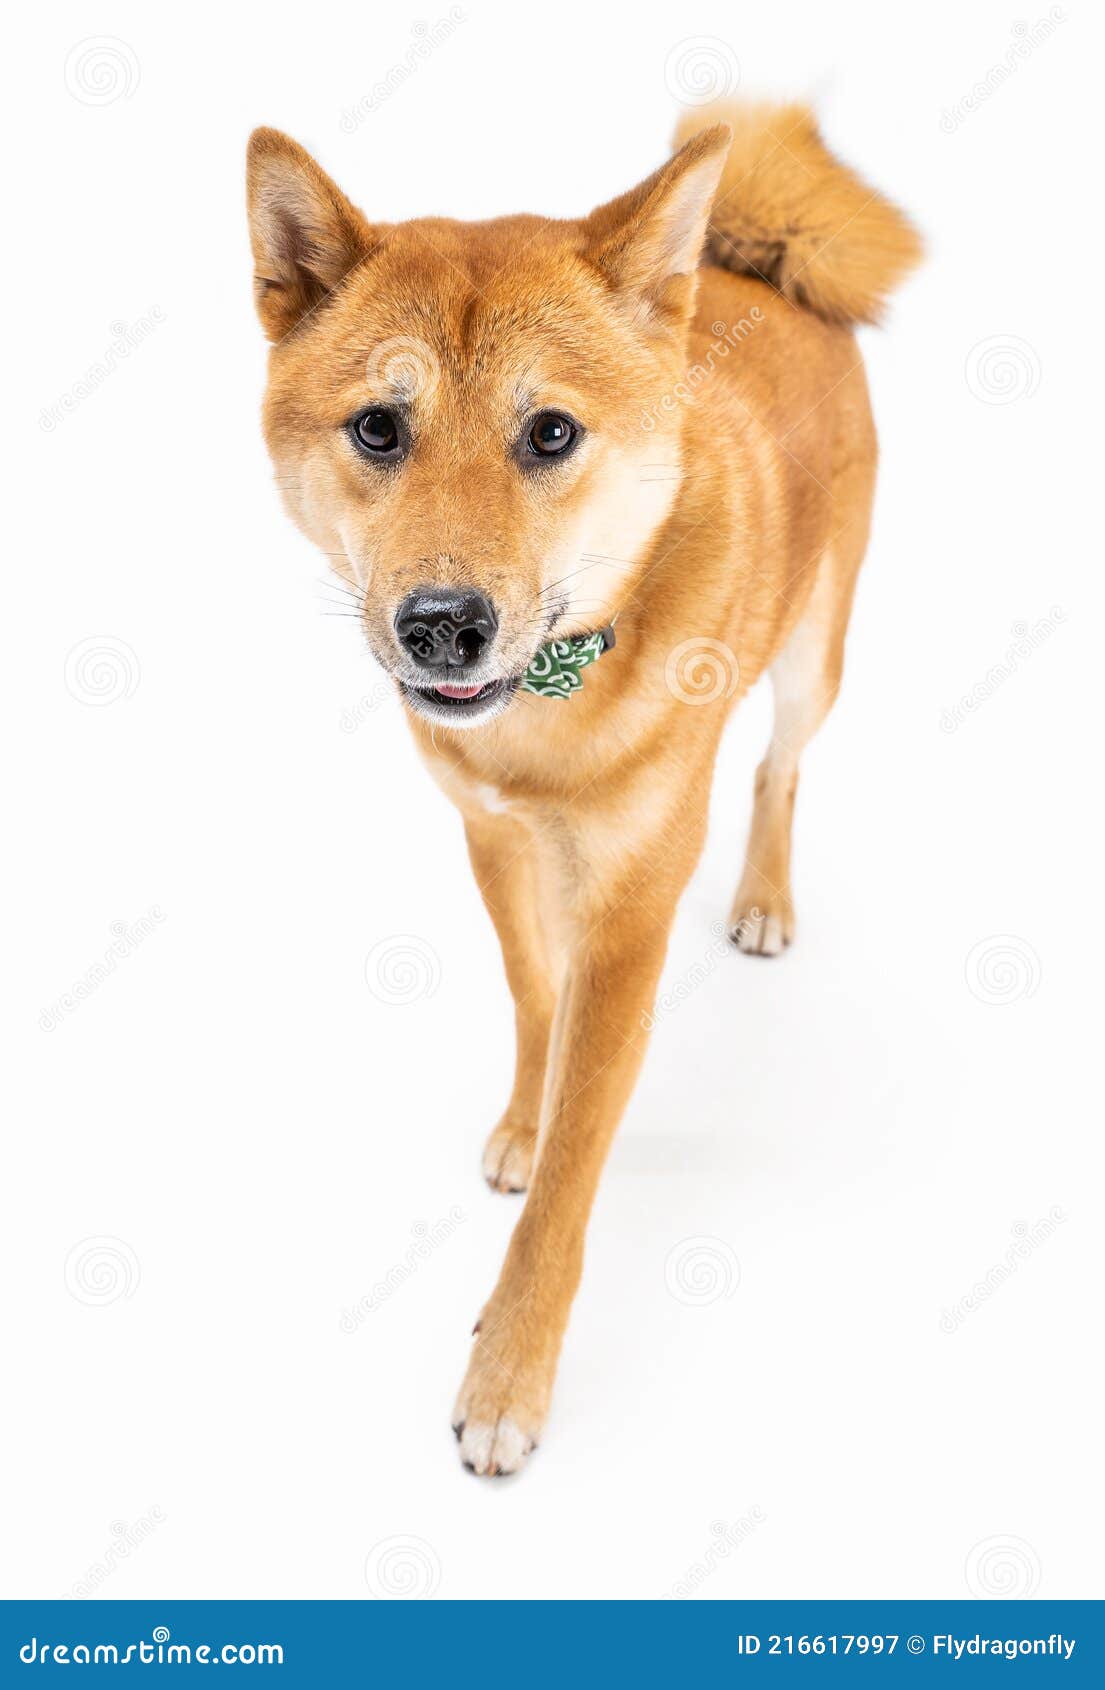 Friendly Looking Funny Dog Shiba Inu Happy Smiling On White Background.  Stock Image - Image Of Emotions, Expressions: 216617997